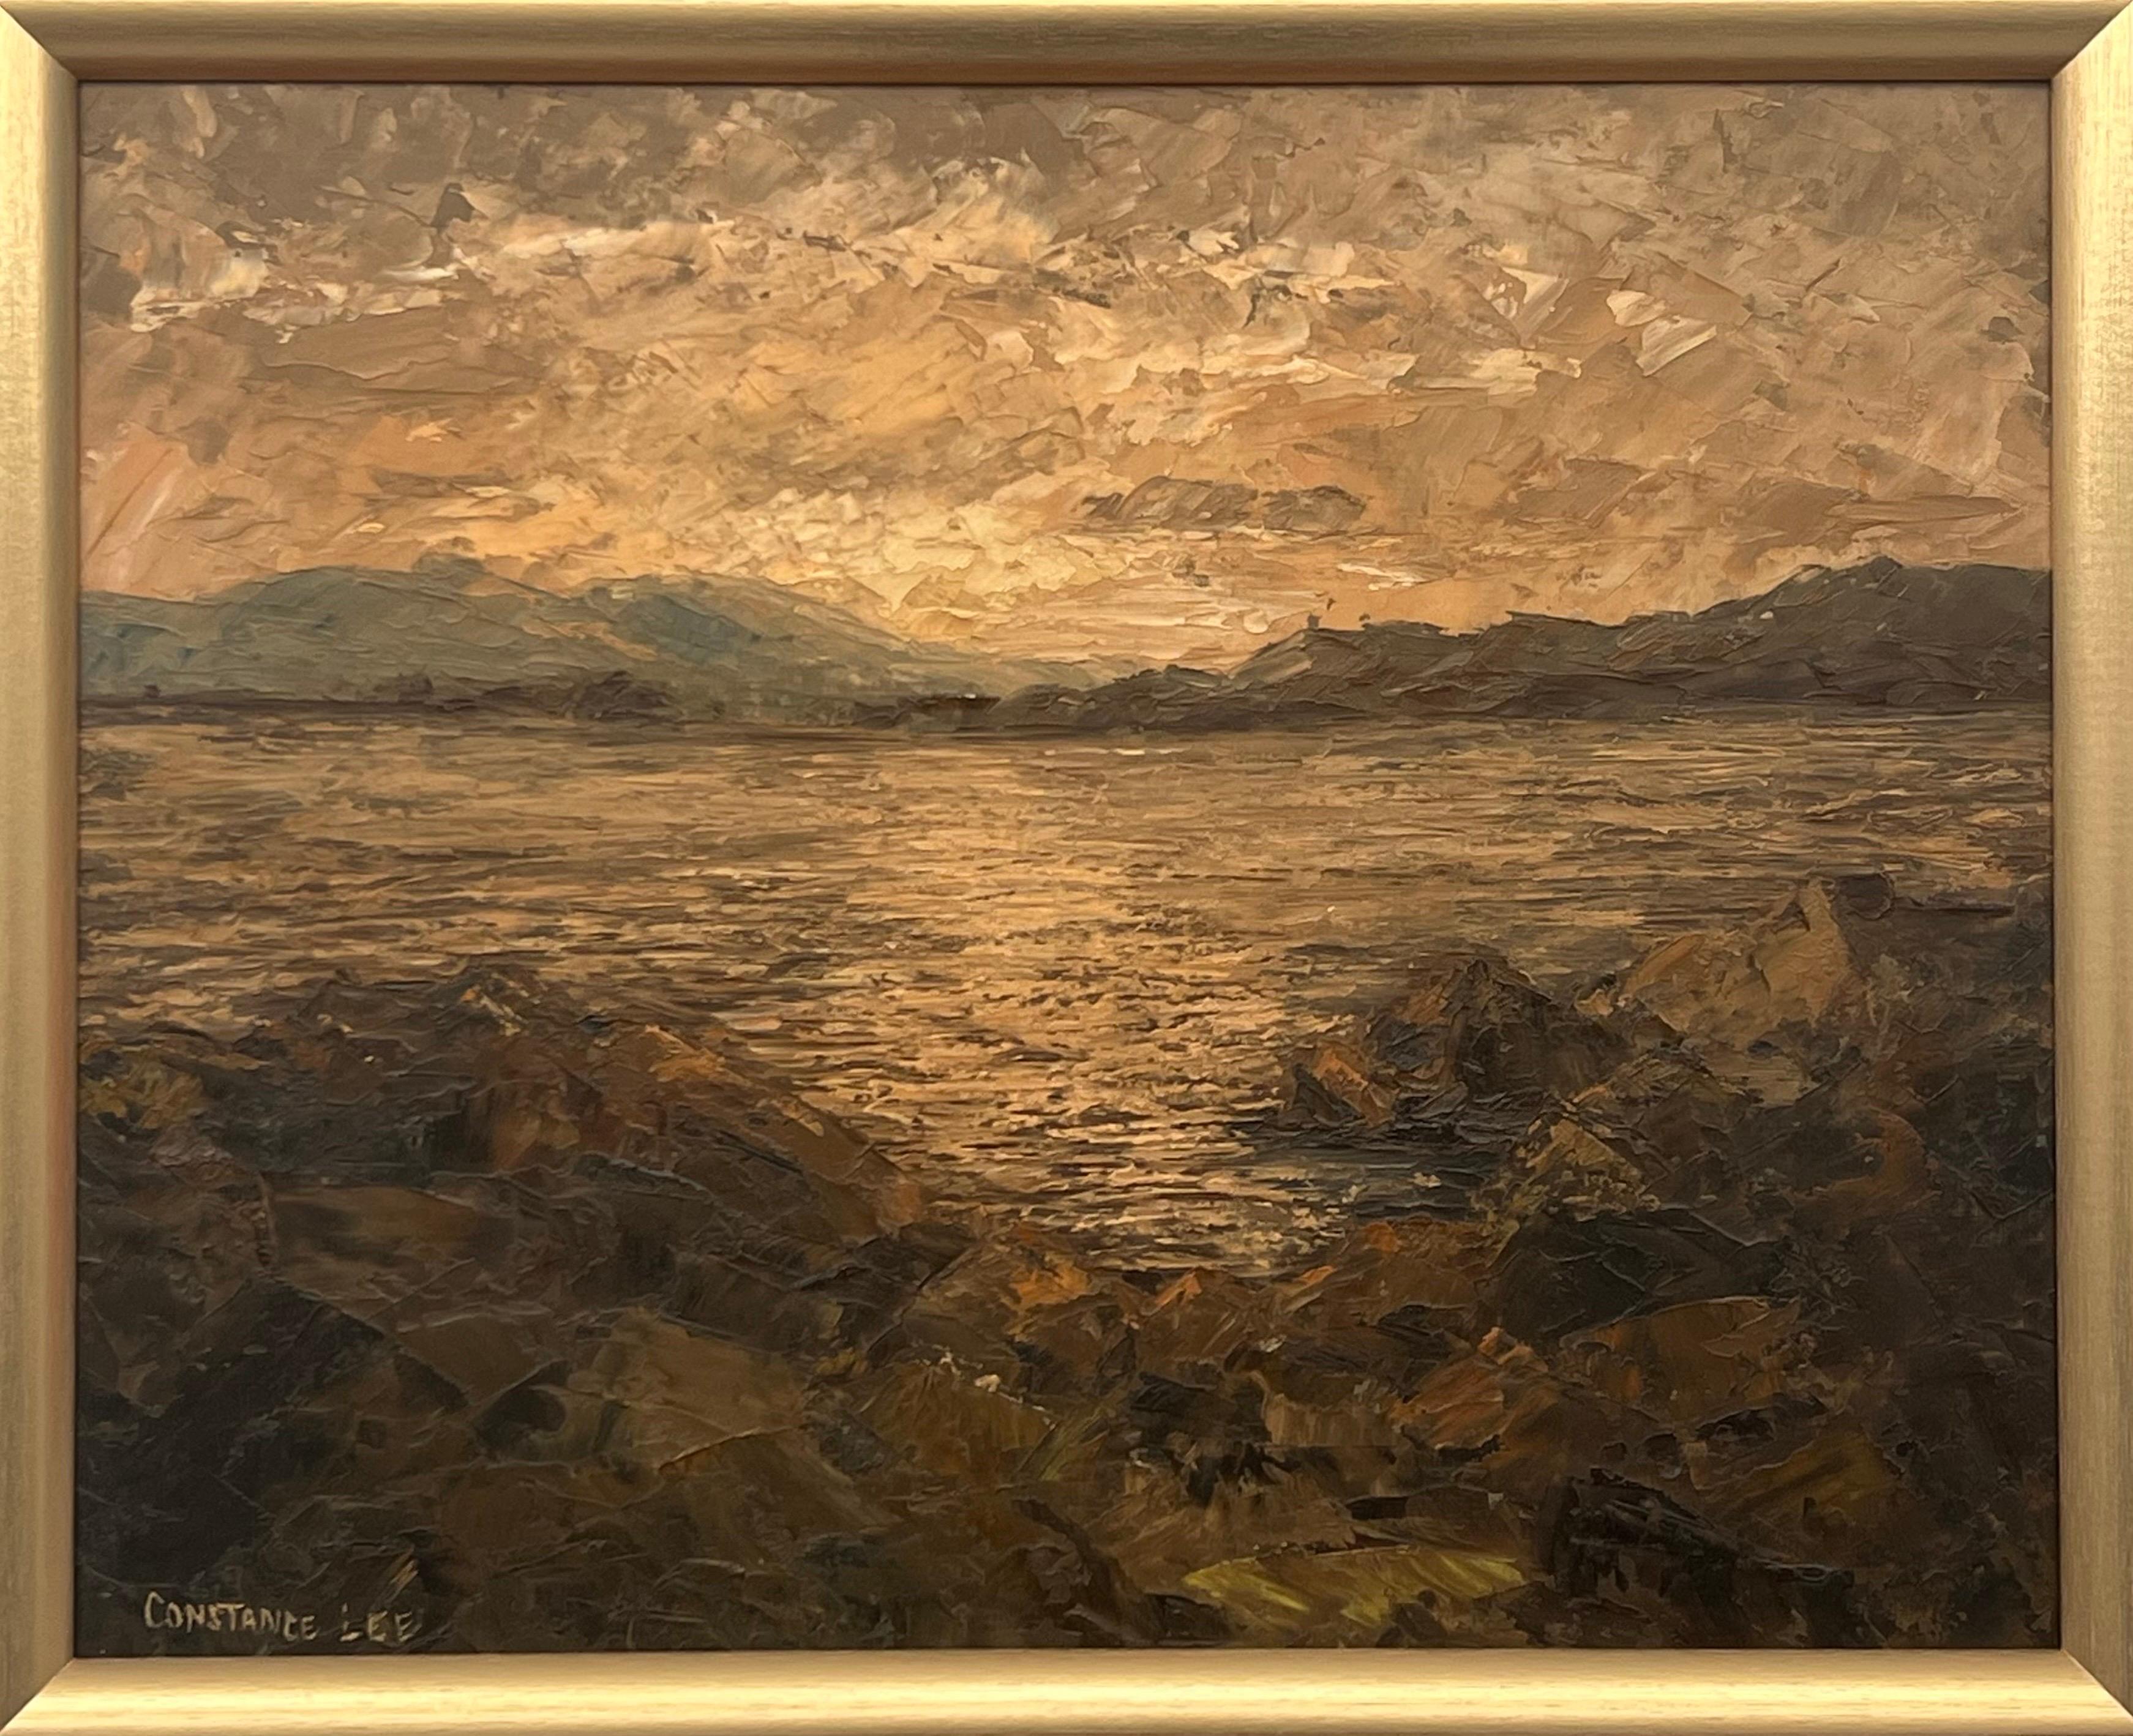 Constance Lee Abstract Painting - Atmospheric Seascape Sunset Landscape Impasto Oil Painting by 20thCentury Artist